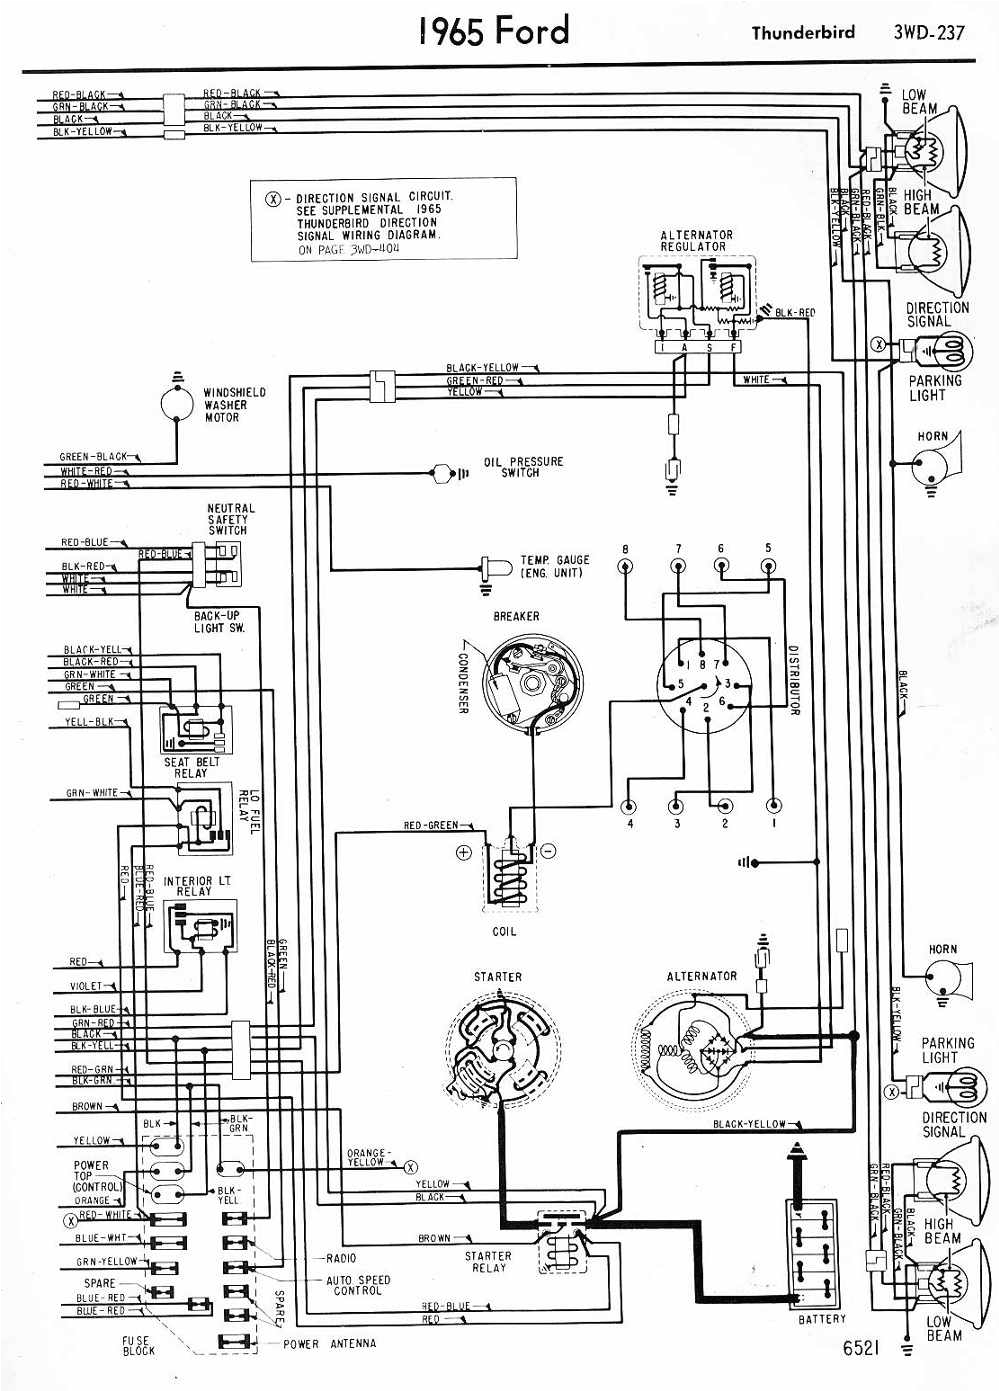 wiring diagrams of 1965 ford thunderbird part 2 wiring diagrams recent 1965 thunderbird wiring diagram 1965